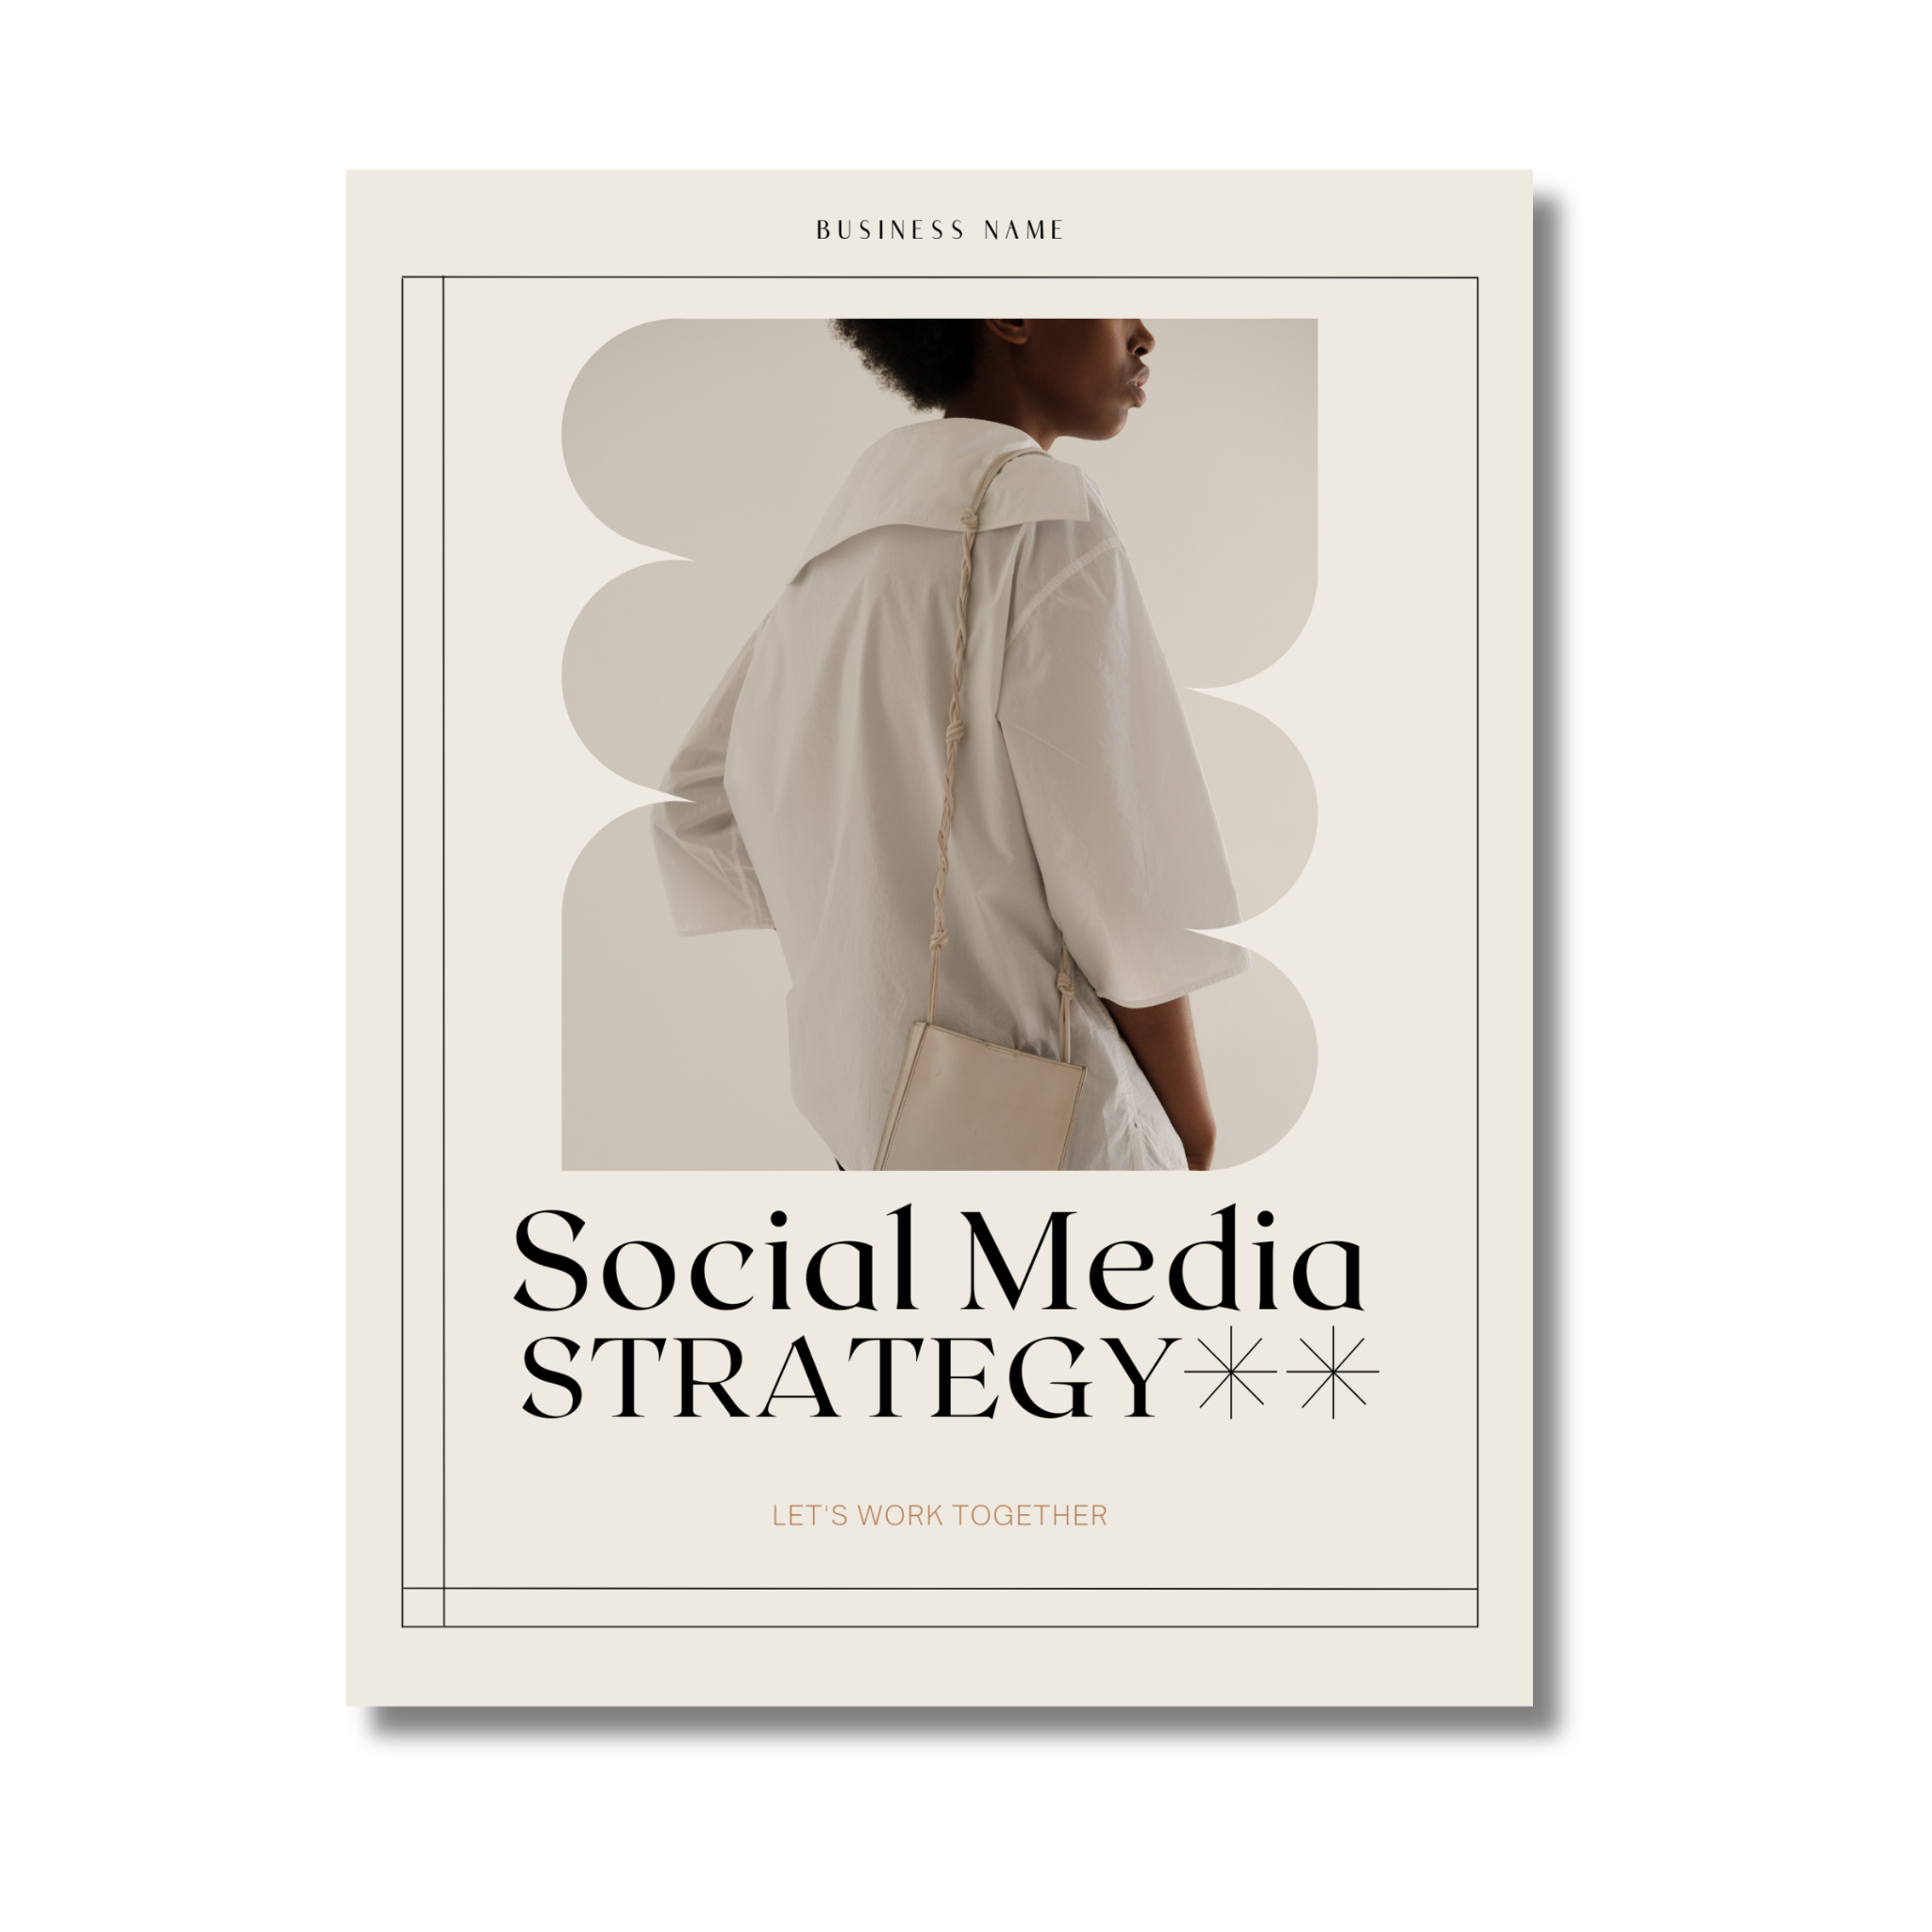 Social Media Strategy Template - Down to Earth